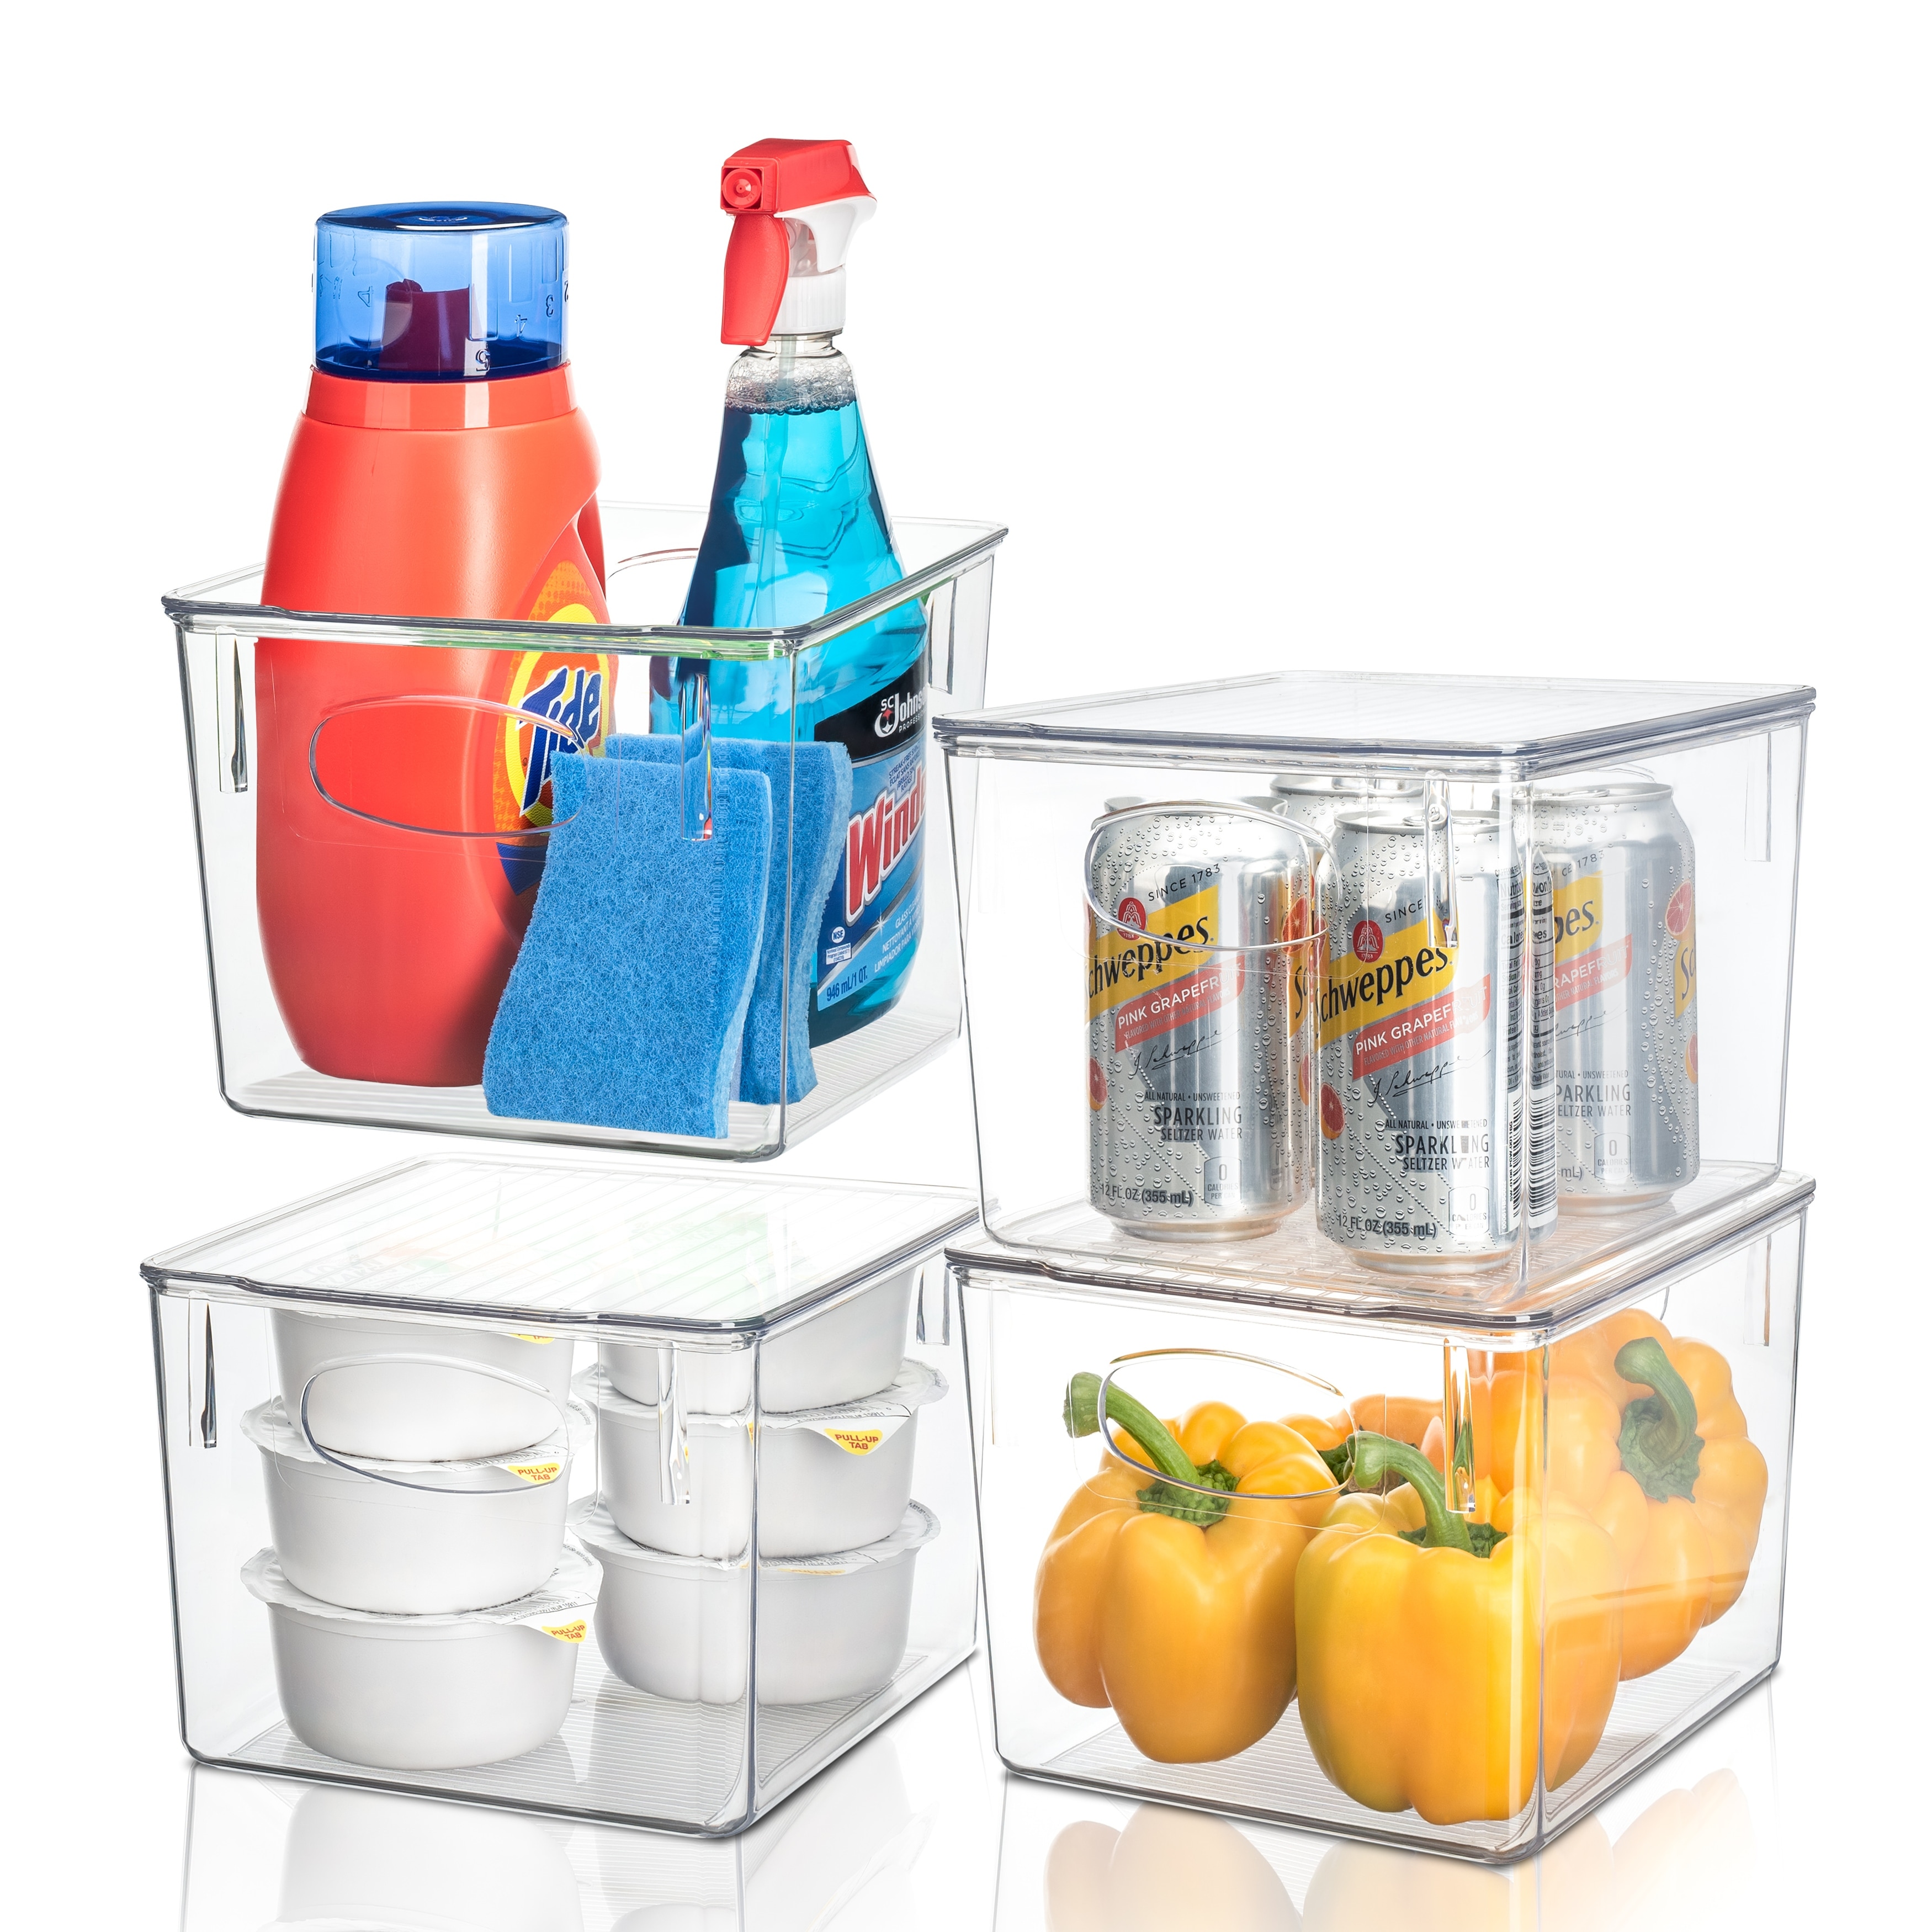 https://ak1.ostkcdn.com/images/products/is/images/direct/053b20a55d047e0860ab38ea0a4fcfe1e56bc3af/Stackable-Fridge-Freezer-Bins-Organizer-w-Lid-Food-Storage-Containers.jpg